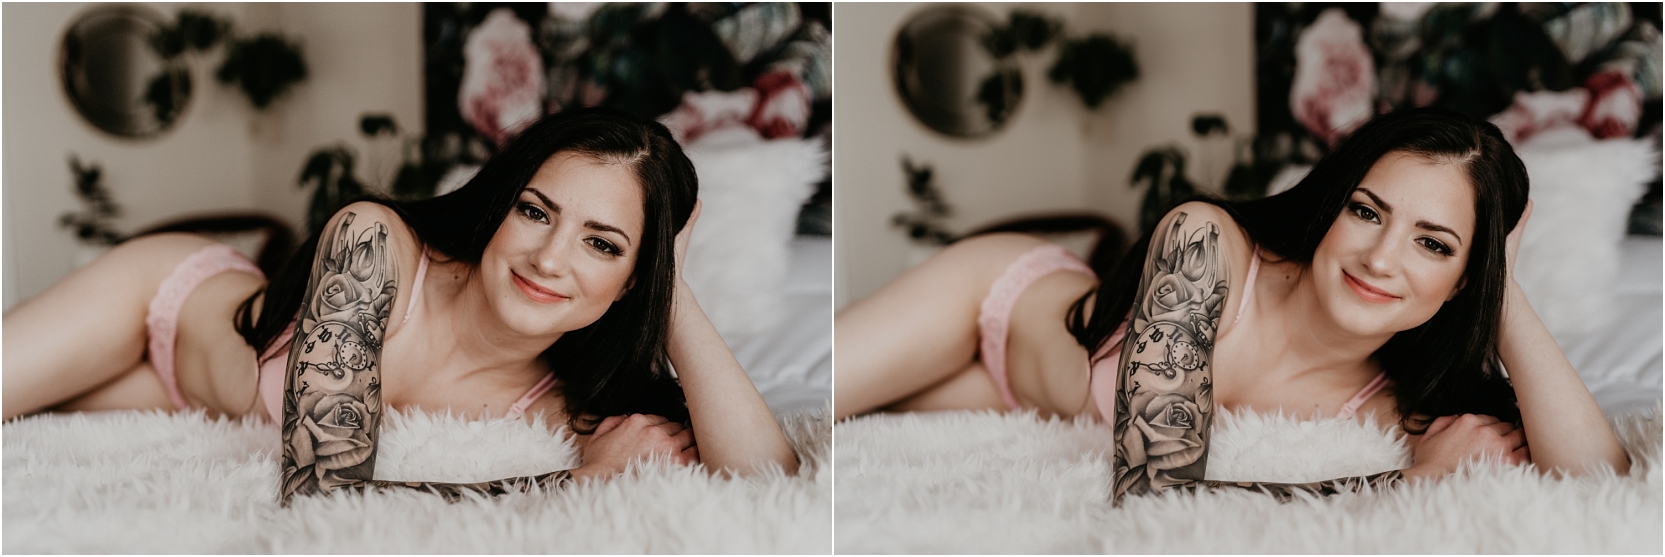 Right: Before Portraiture Applied, Left: After Portraiture Applied 50% skin smoothing. Makayla Madden Photography